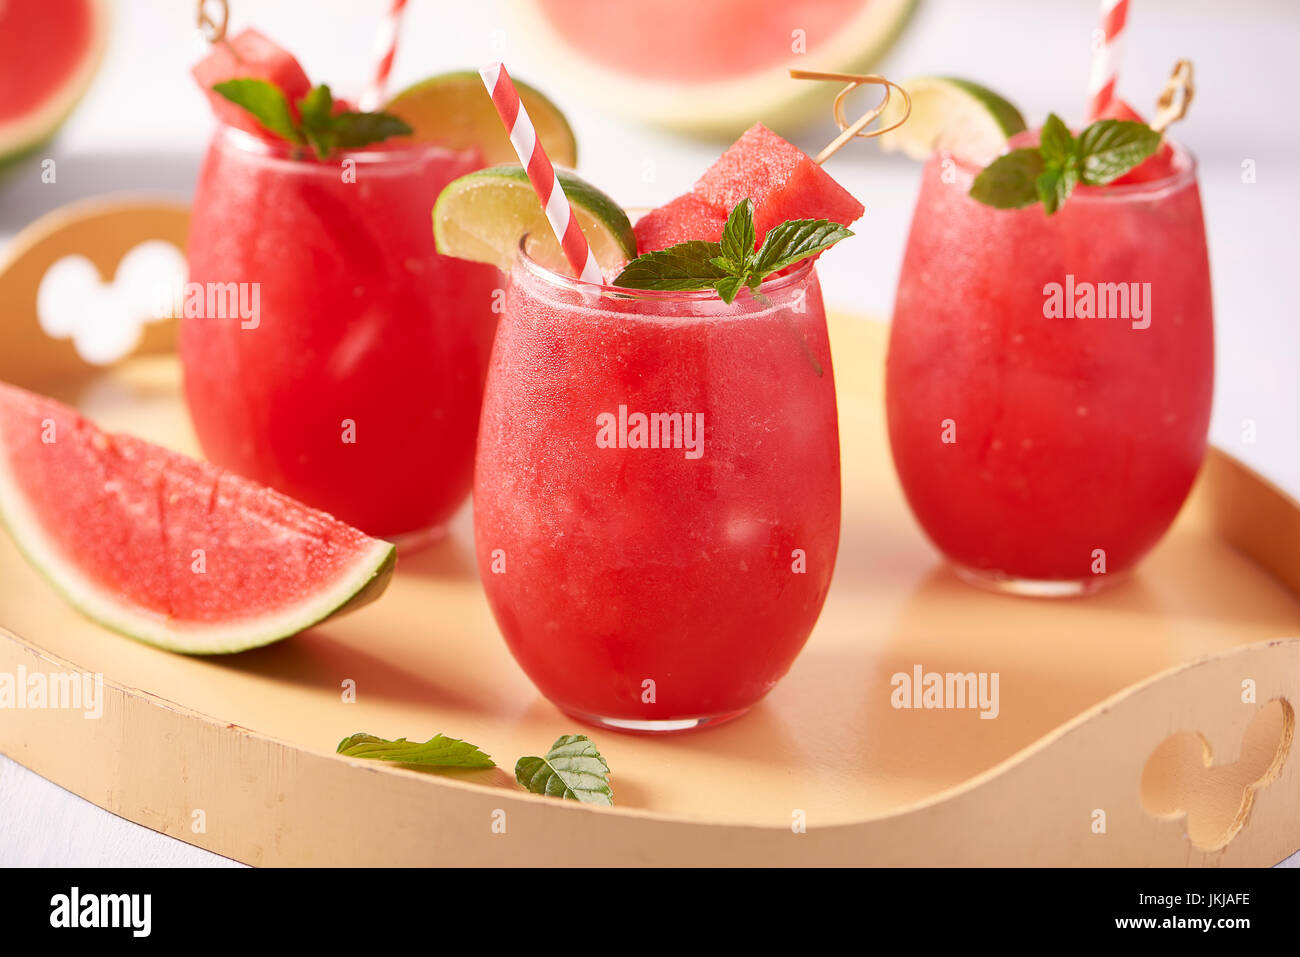 Watermelon cocktails ready for summer drinking Stock Photo